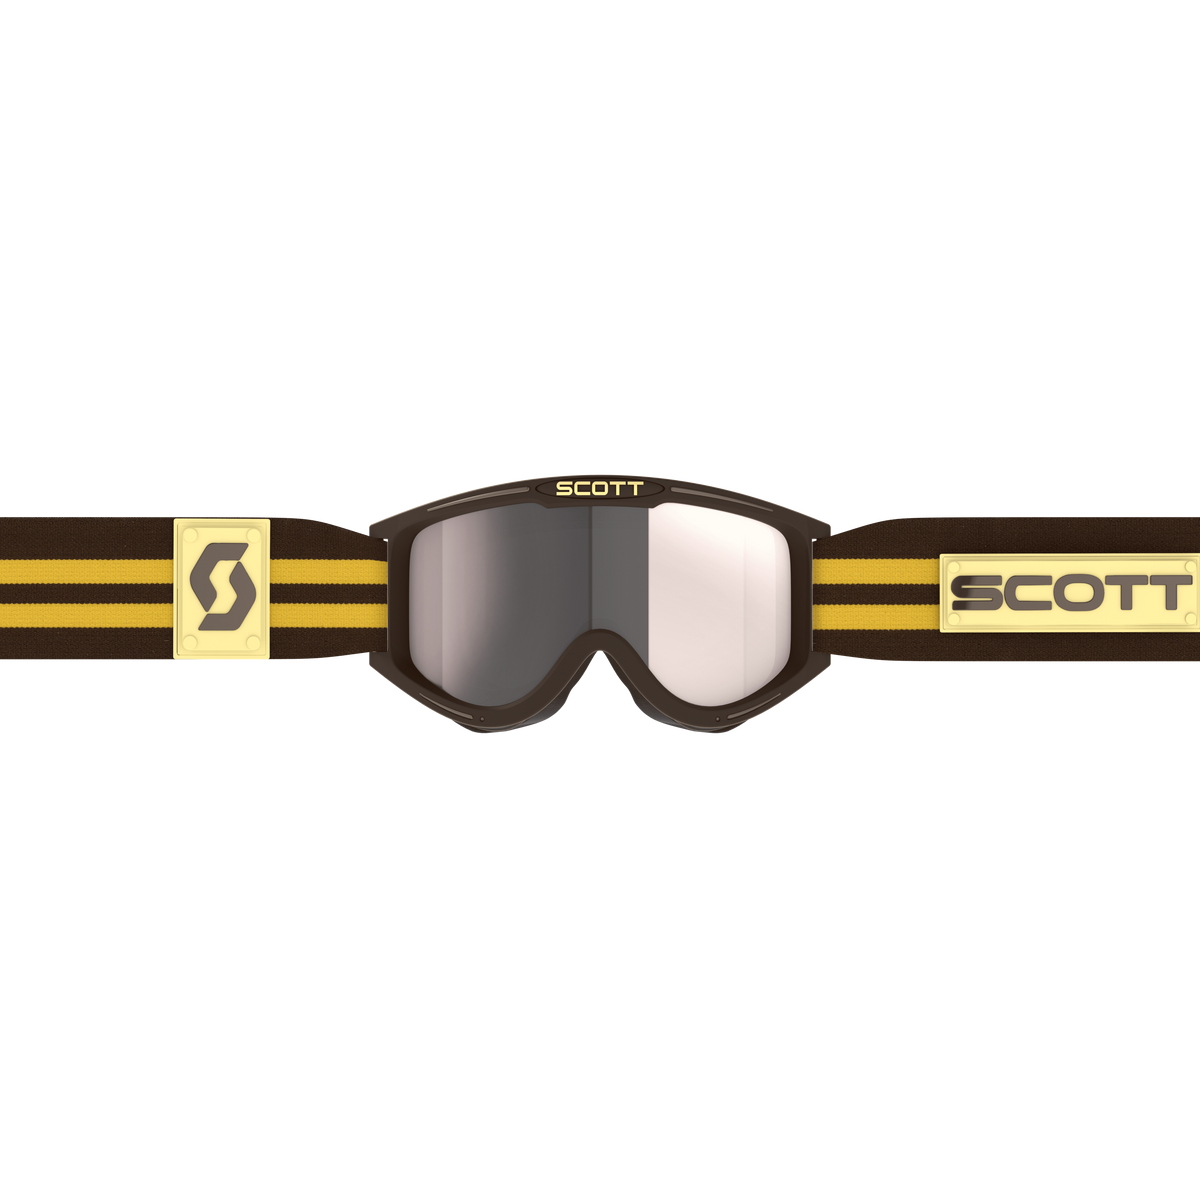 Scott Goggle 89X Era Brown with Silver Lens